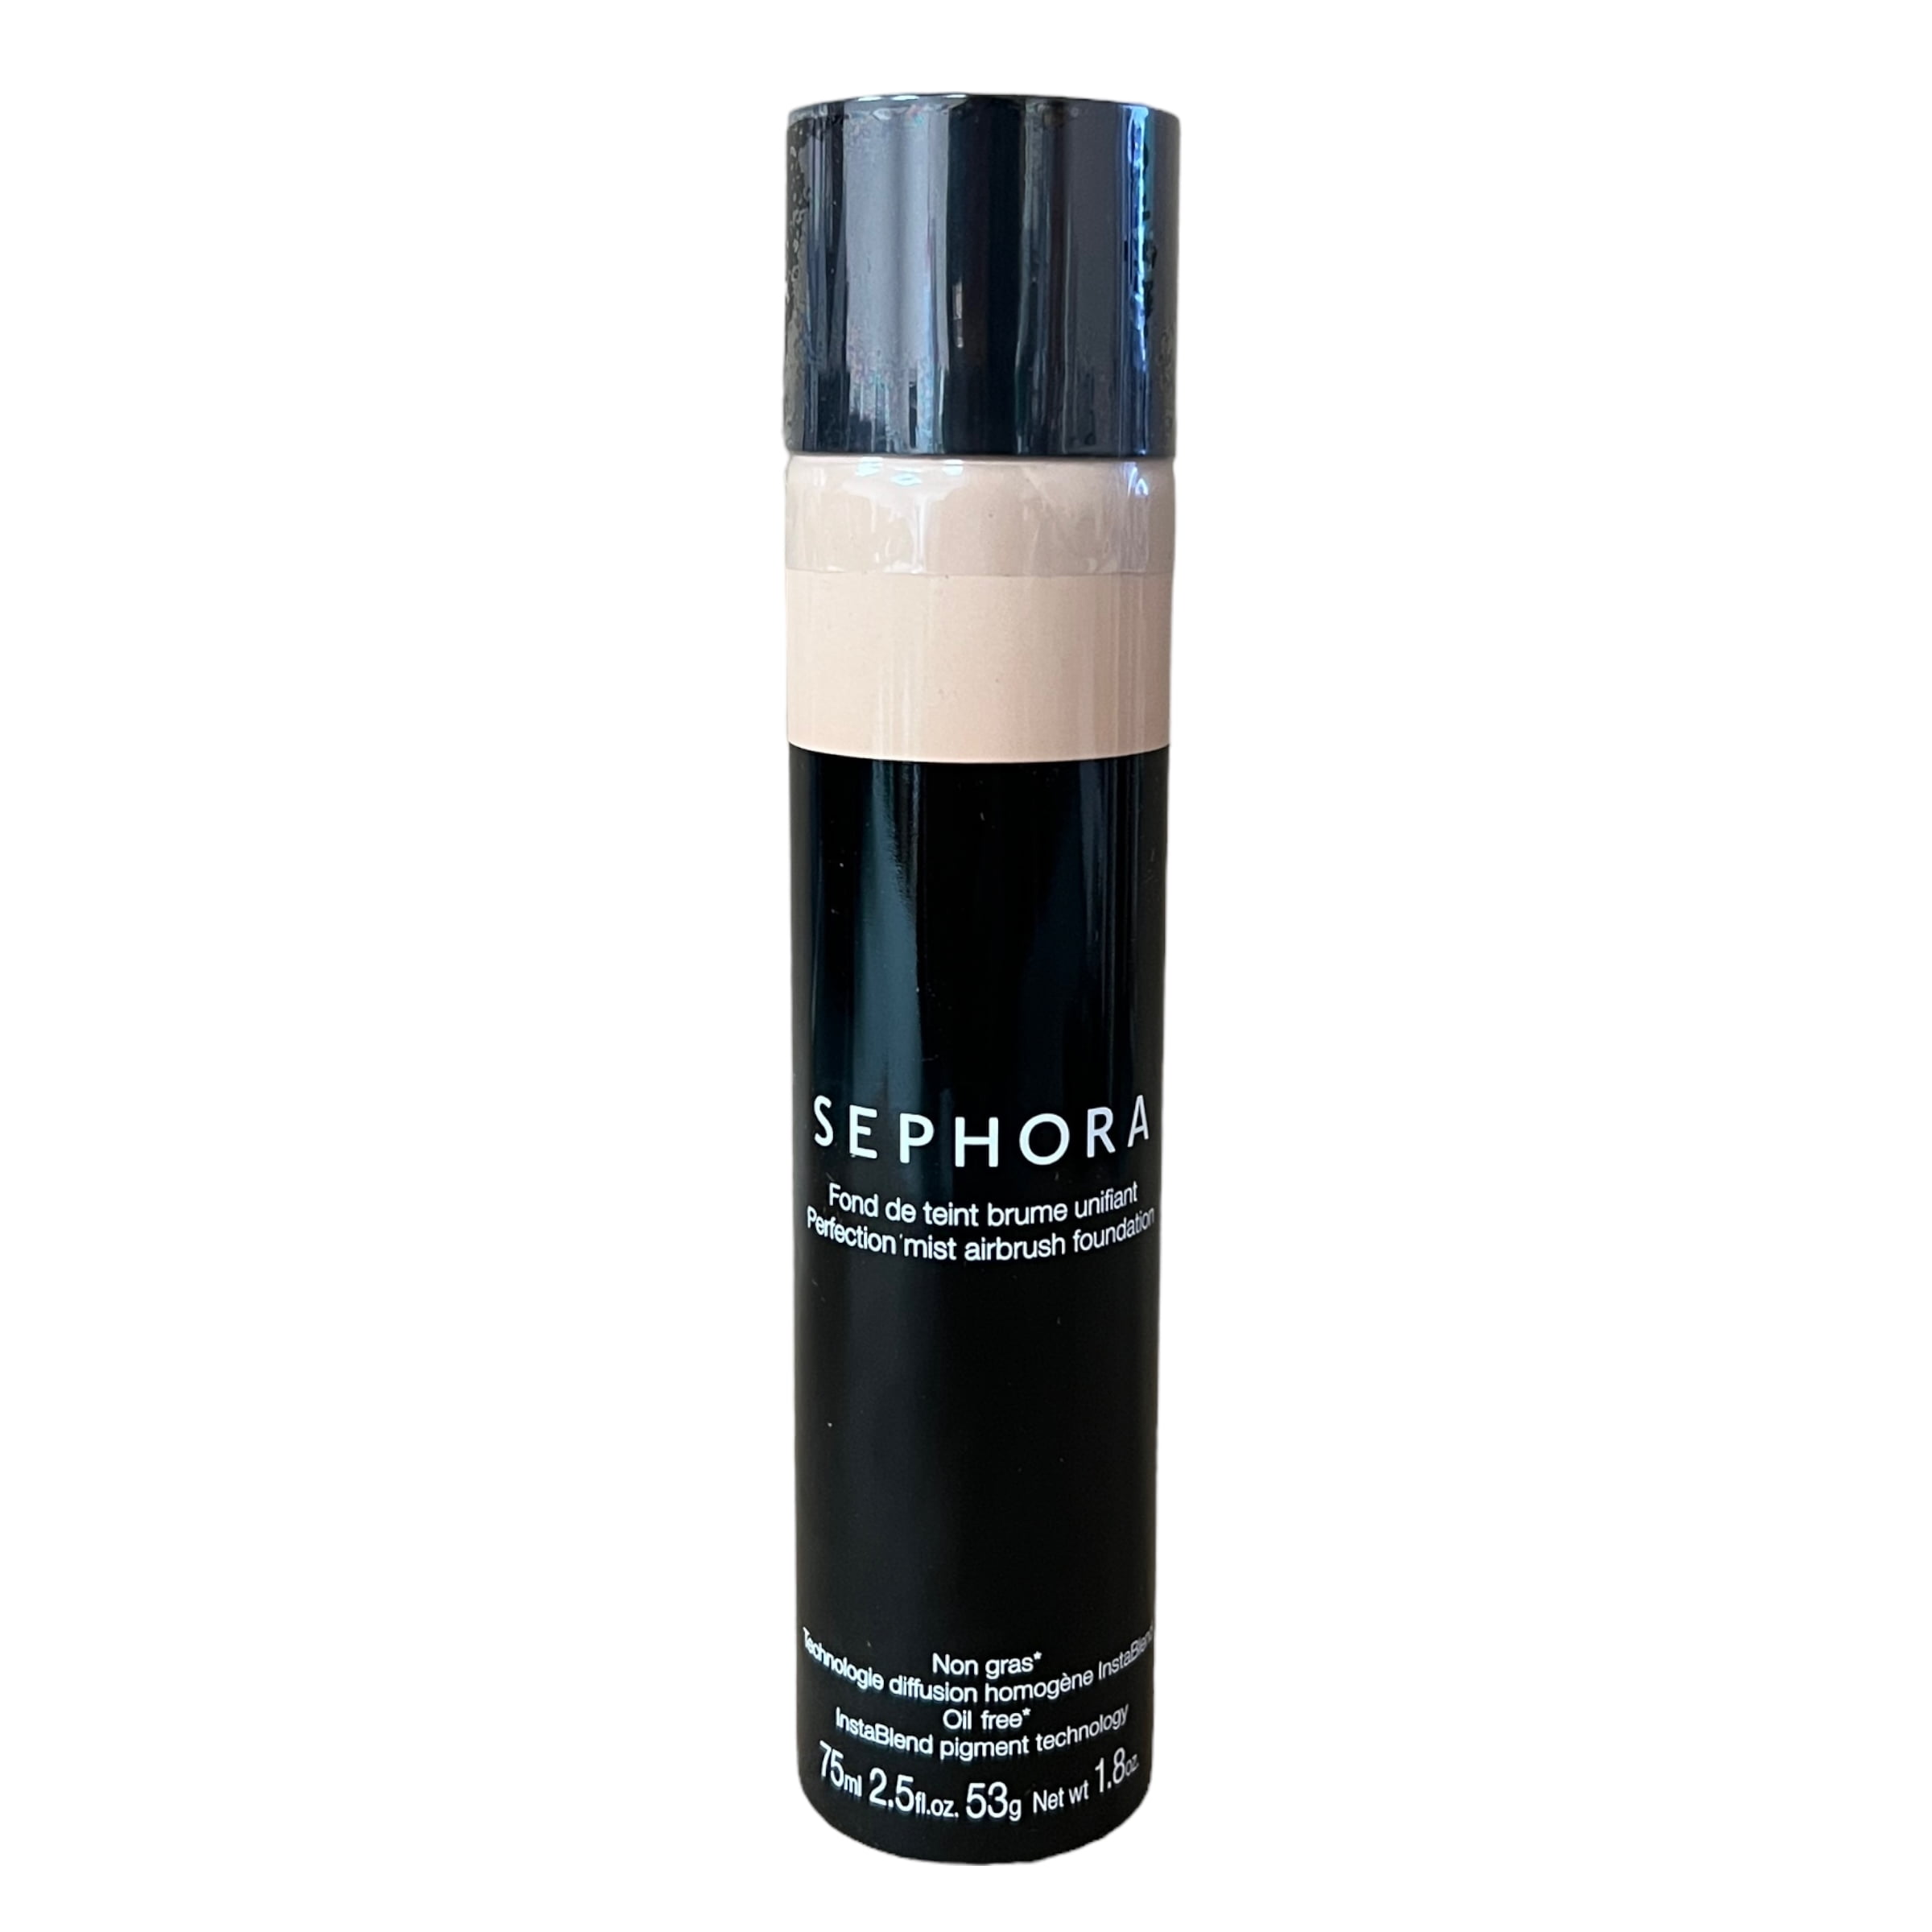 Sephora Perfection Mist Airbrush Foundation, Fair, 2.5 fl oz Ingredients  and Reviews